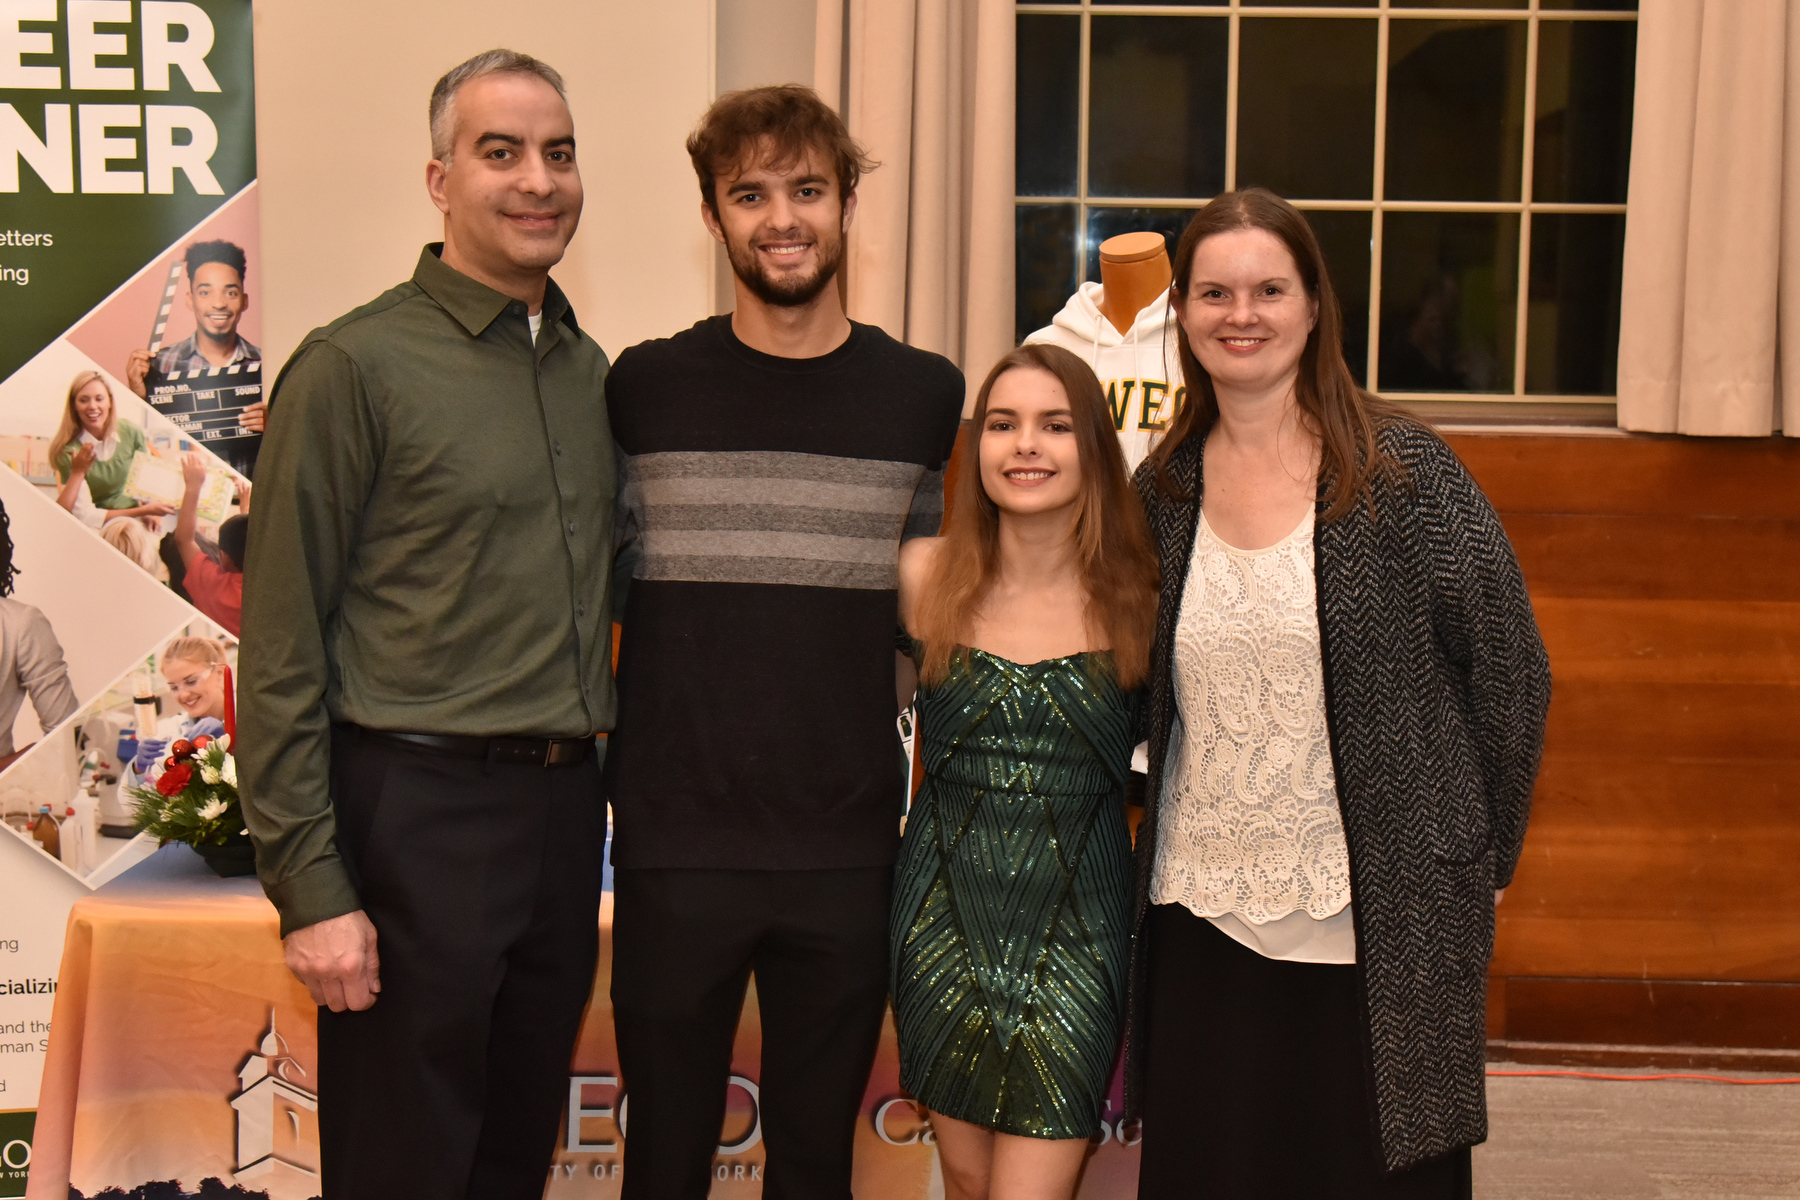 The Commencement Eve Reception held Dec. 15 in the Sheldon Hall ballroom celebrated the December Class of 2023 and welcomed the newest members of the Oswego Alumni Association. Calista Sassalos (third from left), one of the hundreds of graduates receiving diplomas at Commencement the next day, takes a photo with her family.